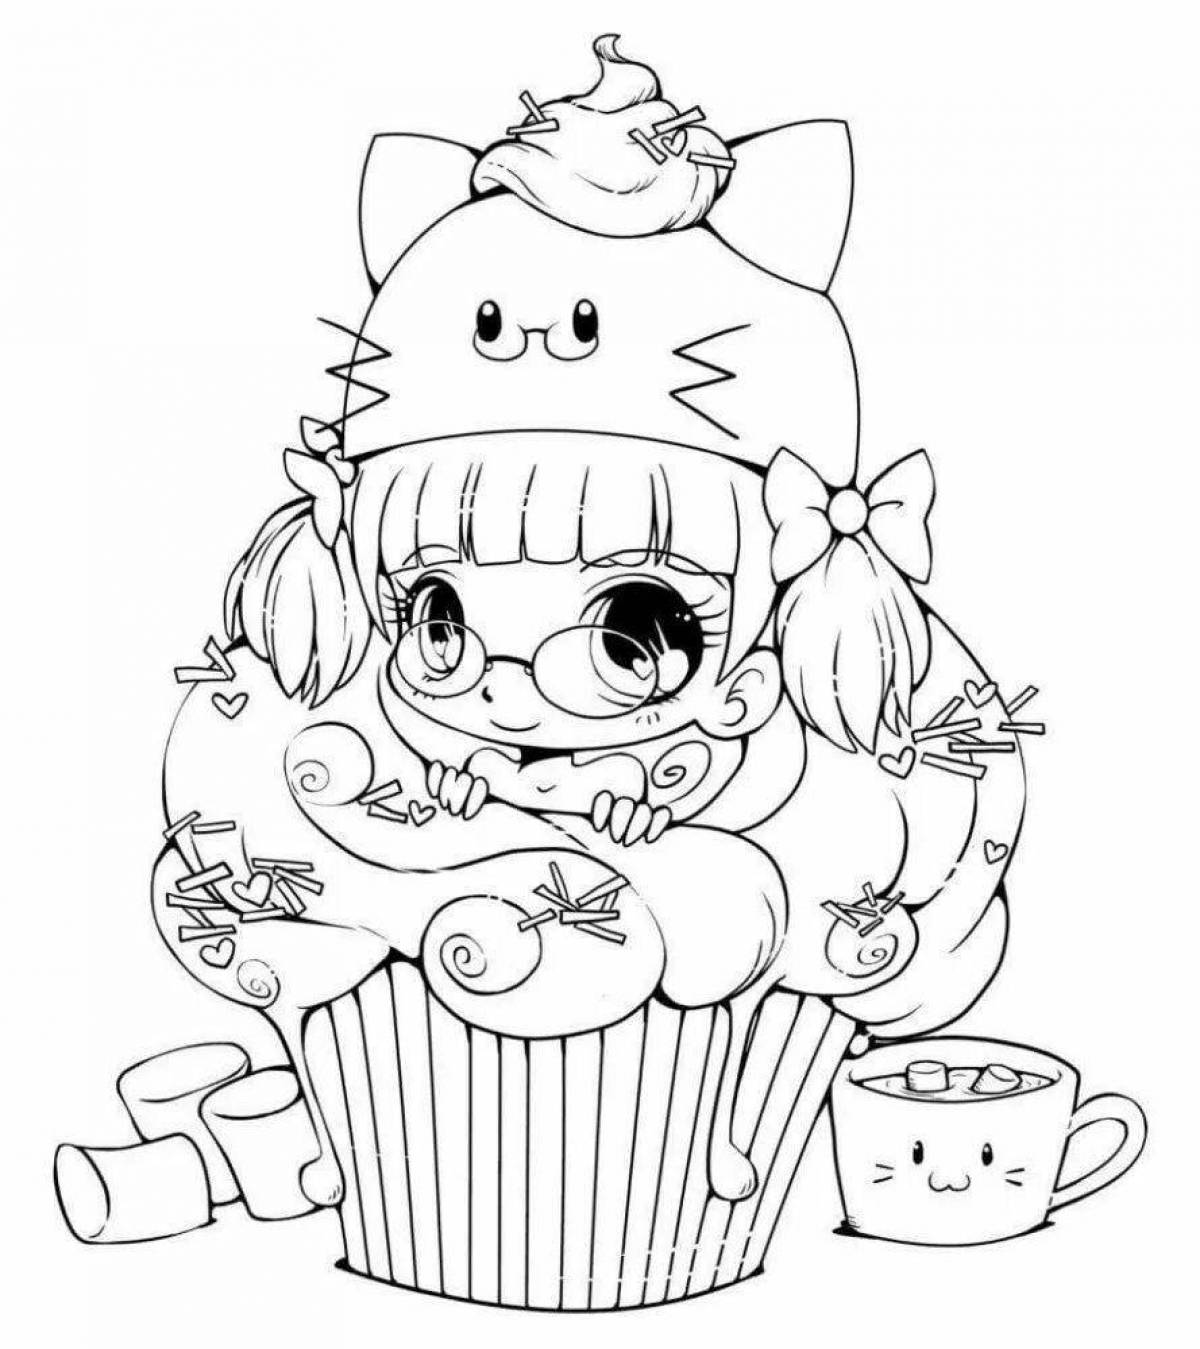 Impressive coloring pages cute stickers for girls